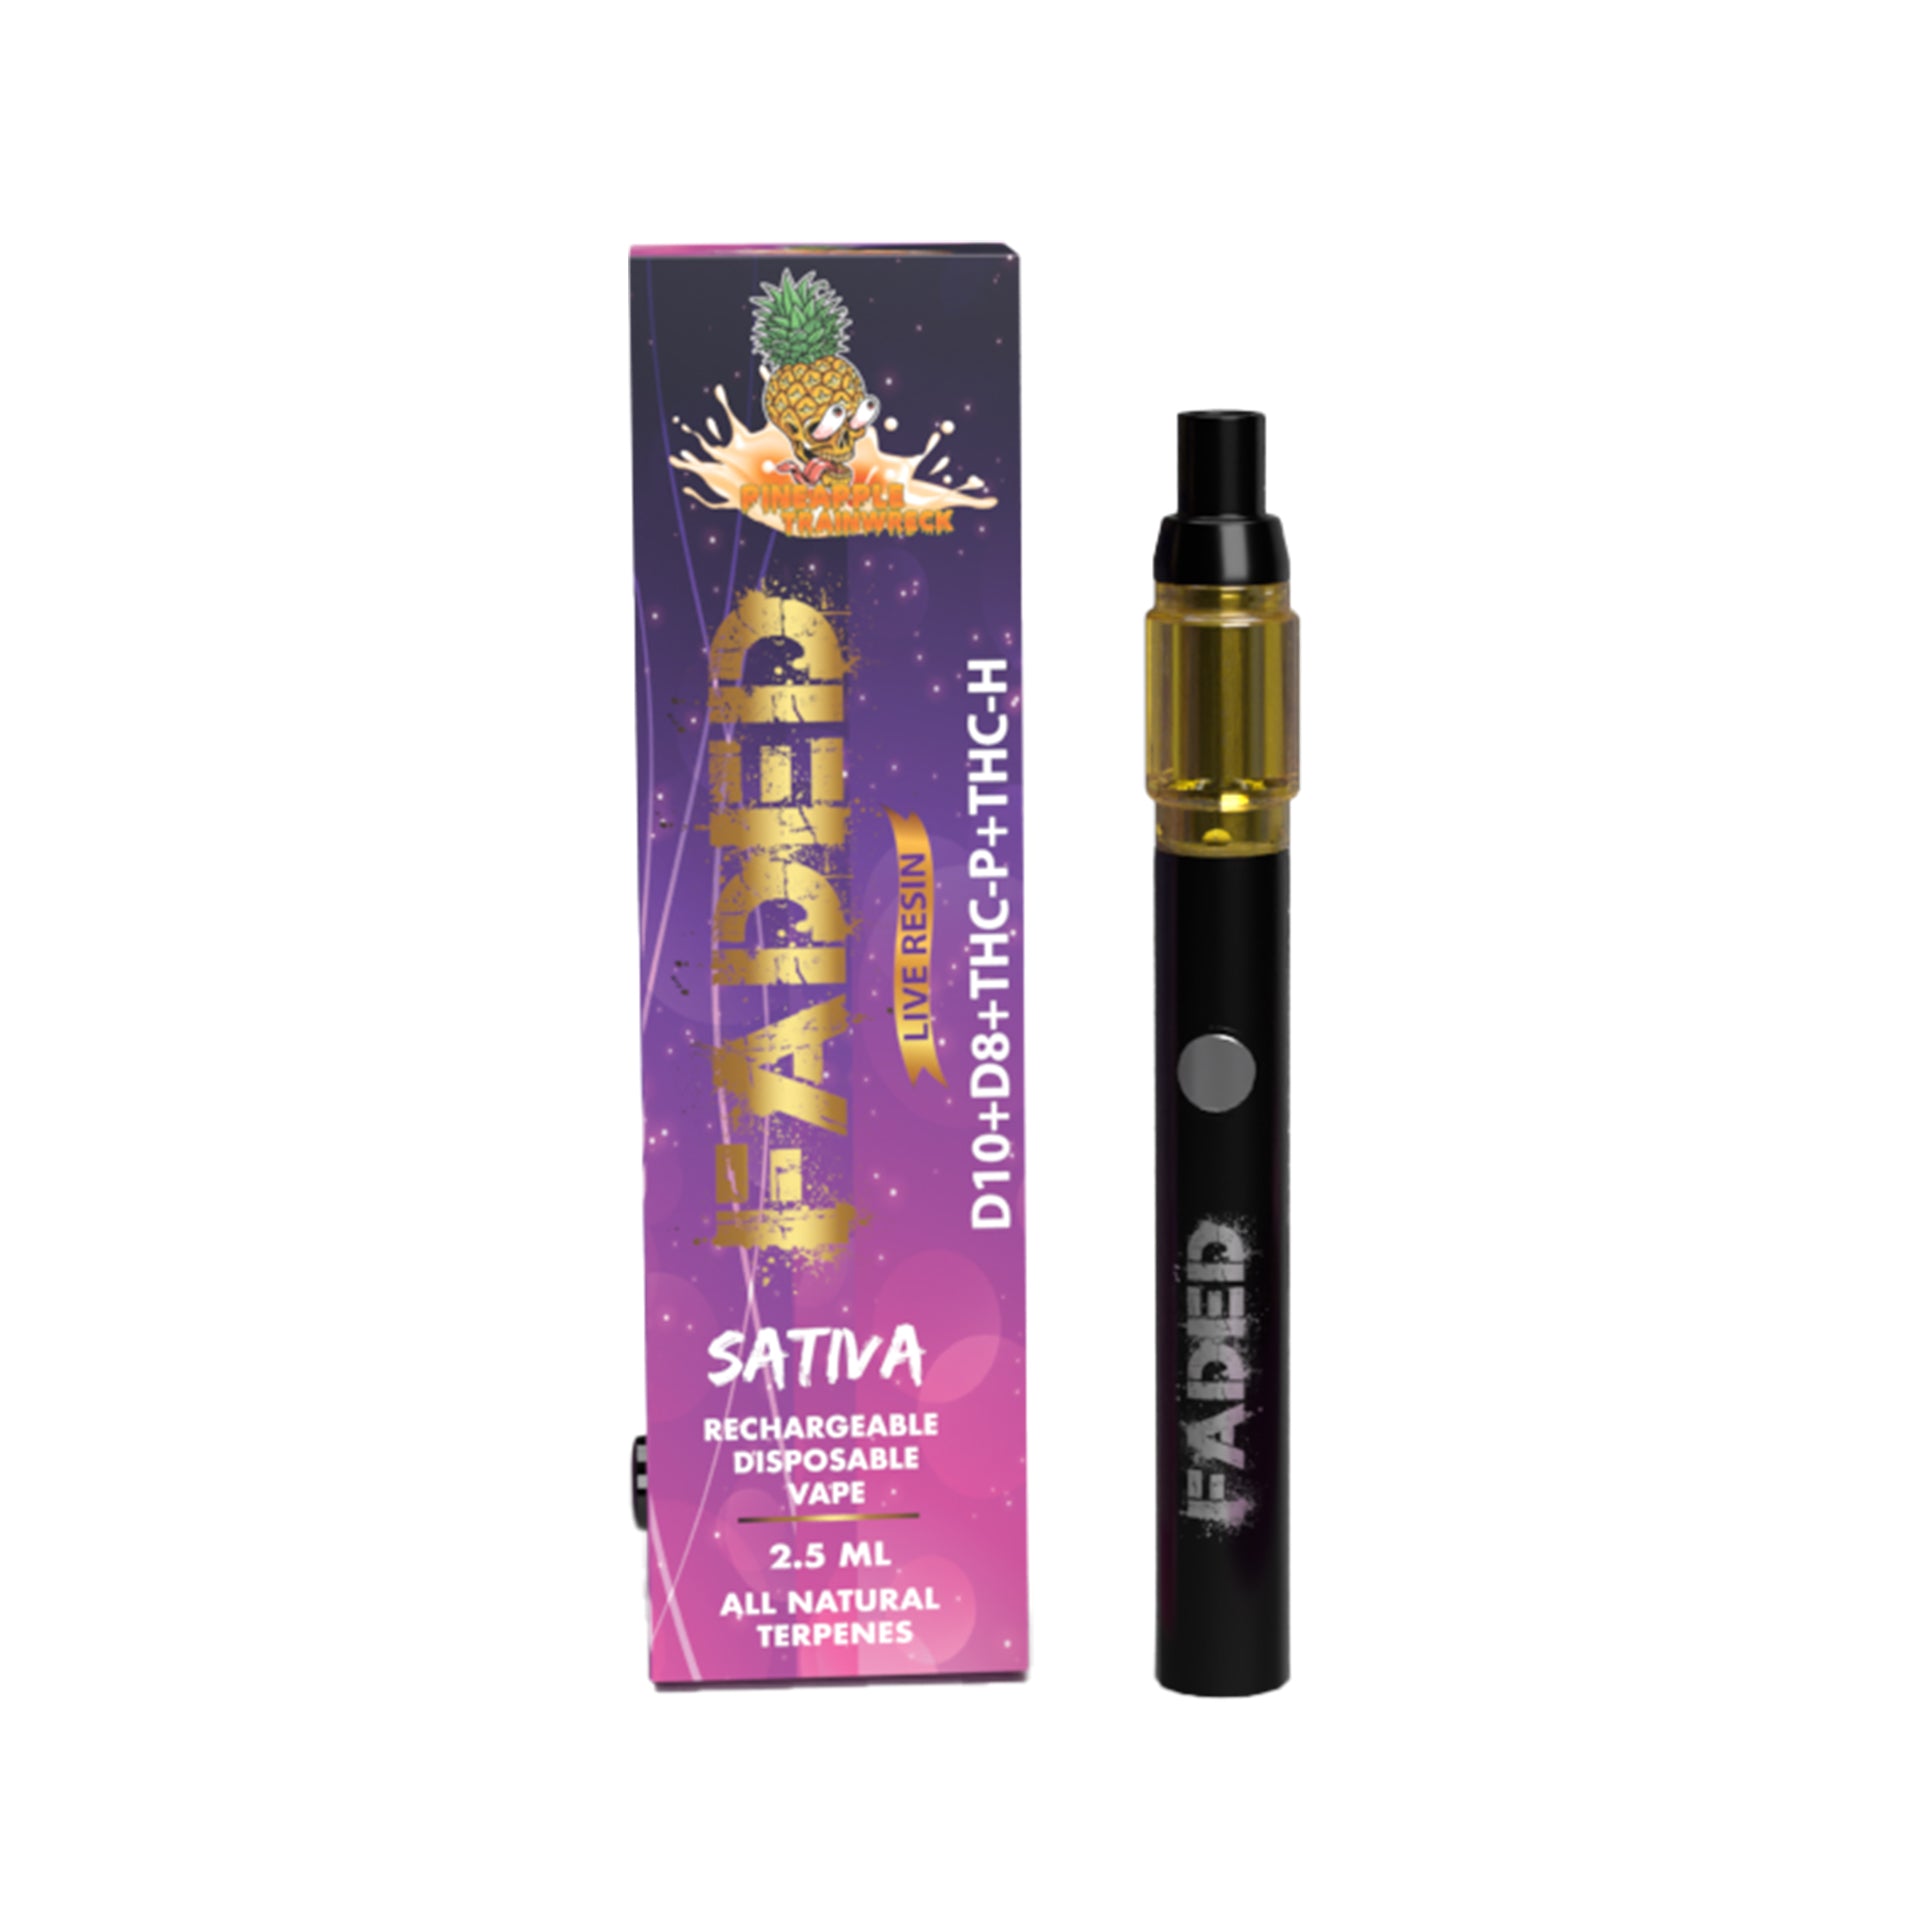 FADED D-10+D-8+THC-P+THC-H LIVE RESIN RECHARGEABLE DISPOSABLE - SATIVA PINEAPPLE TRAINWRECK 2.5ML